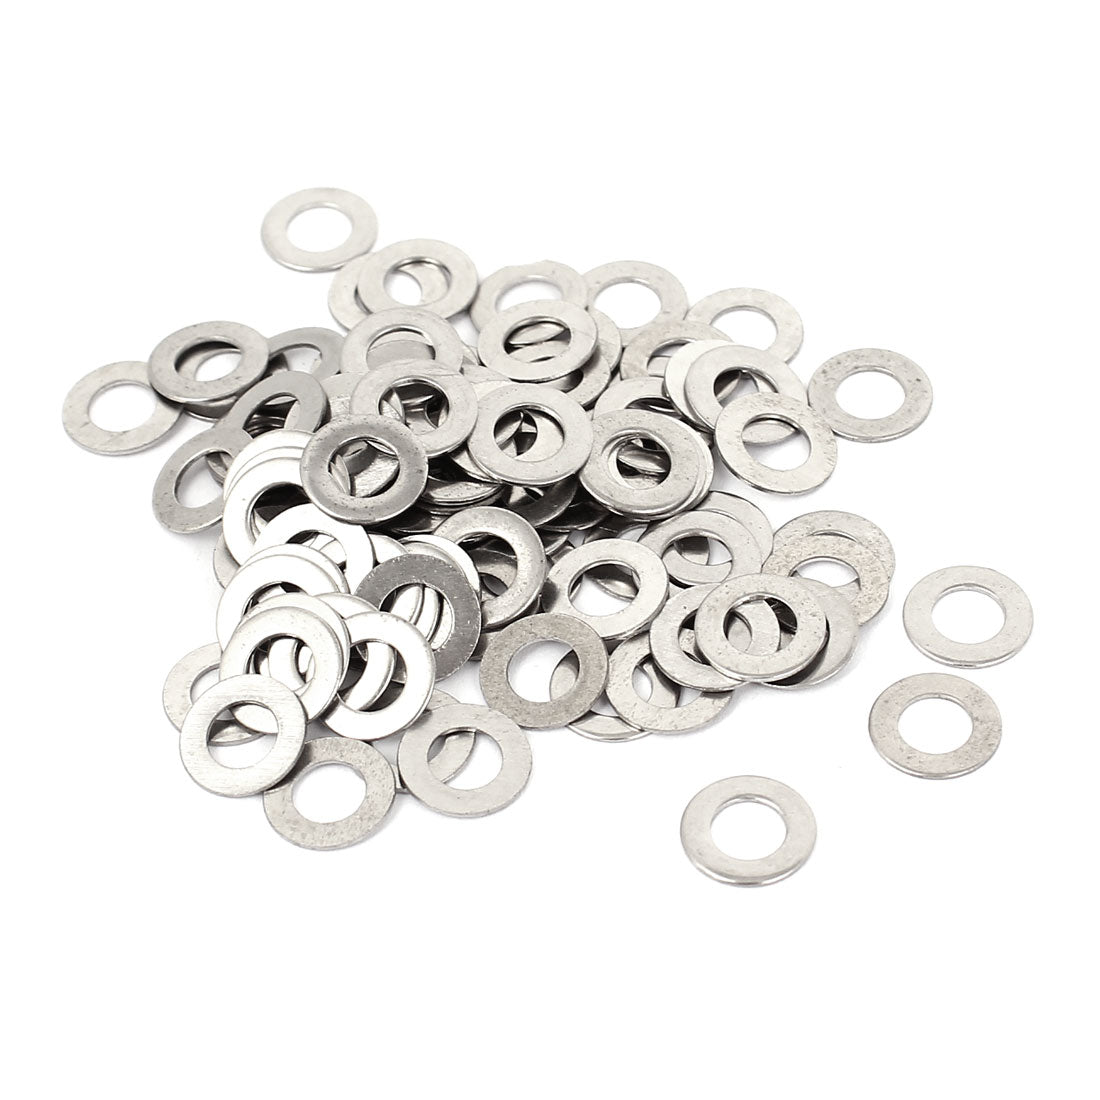 uxcell Uxcell 100Pcs M5x10mmx0.5mm Stainless Steel Metric Round Flat Washer for Bolt Screw